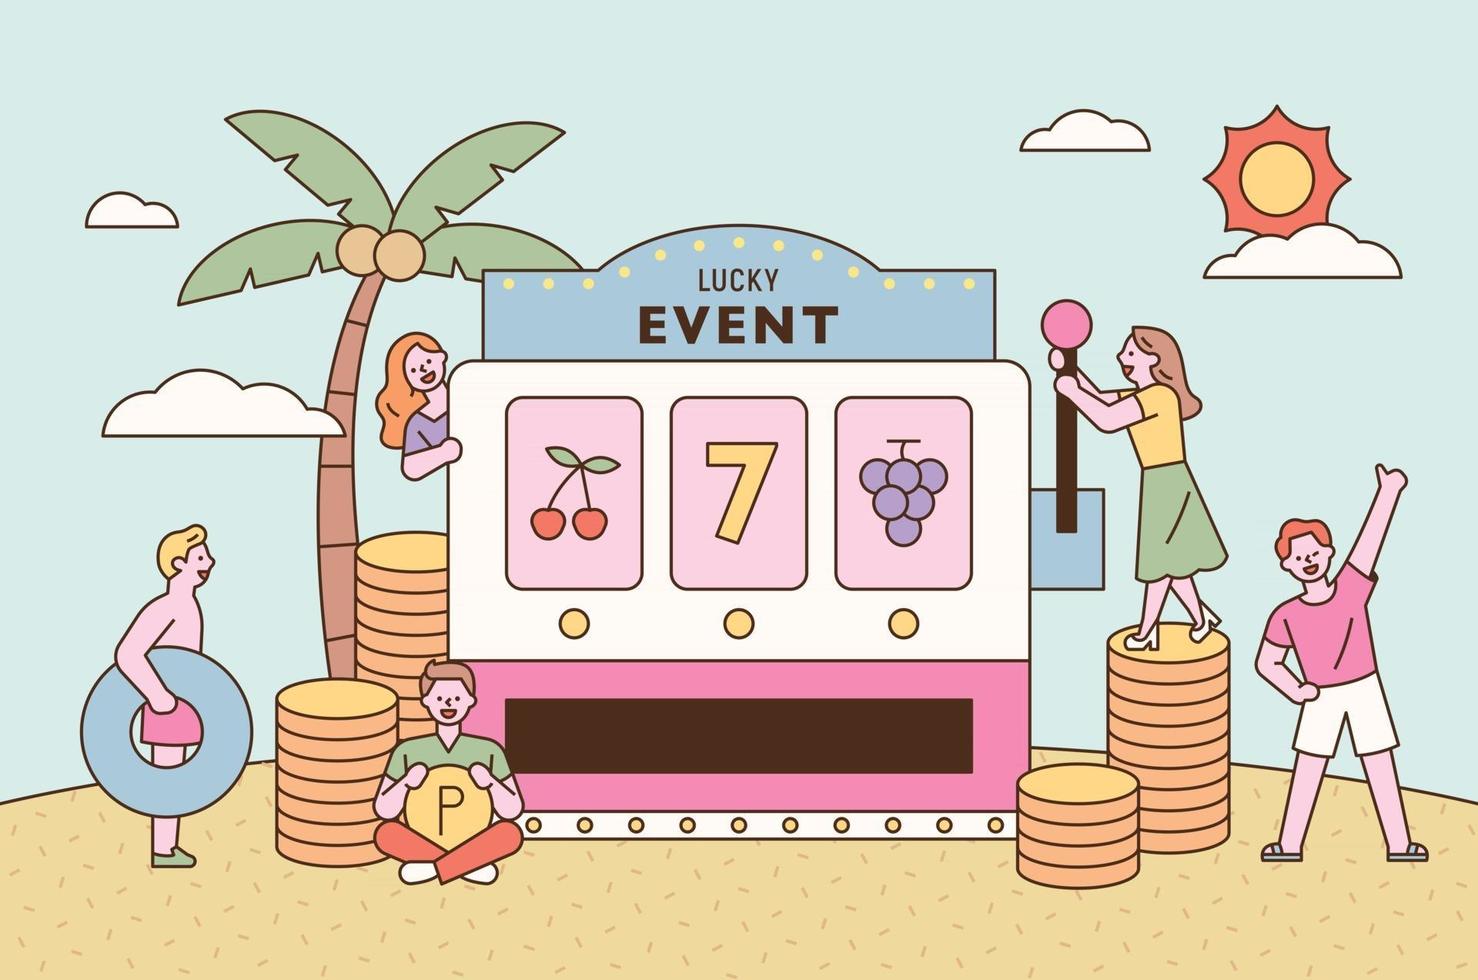 Lucky event promotion poster. People are hoping for good luck around a giant jackpot machine. flat design style minimal vector illustration.